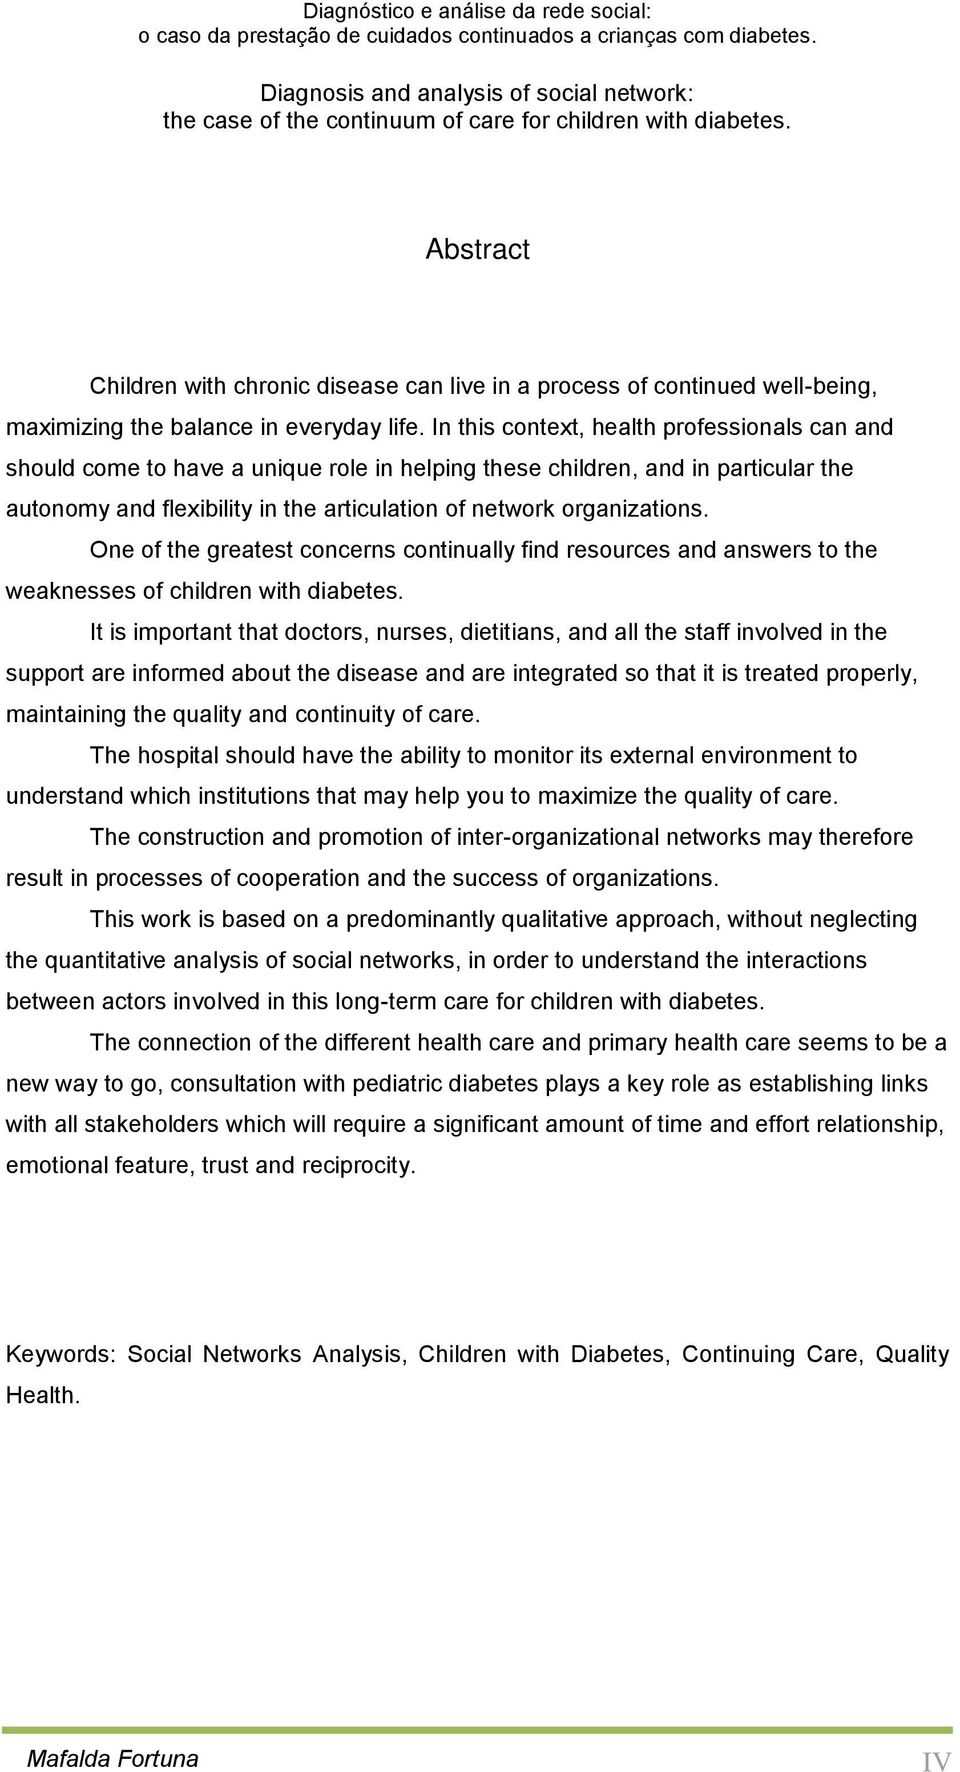 In this context, health professionals can and should come to have a unique role in helping these children, and in particular the autonomy and flexibility in the articulation of network organizations.